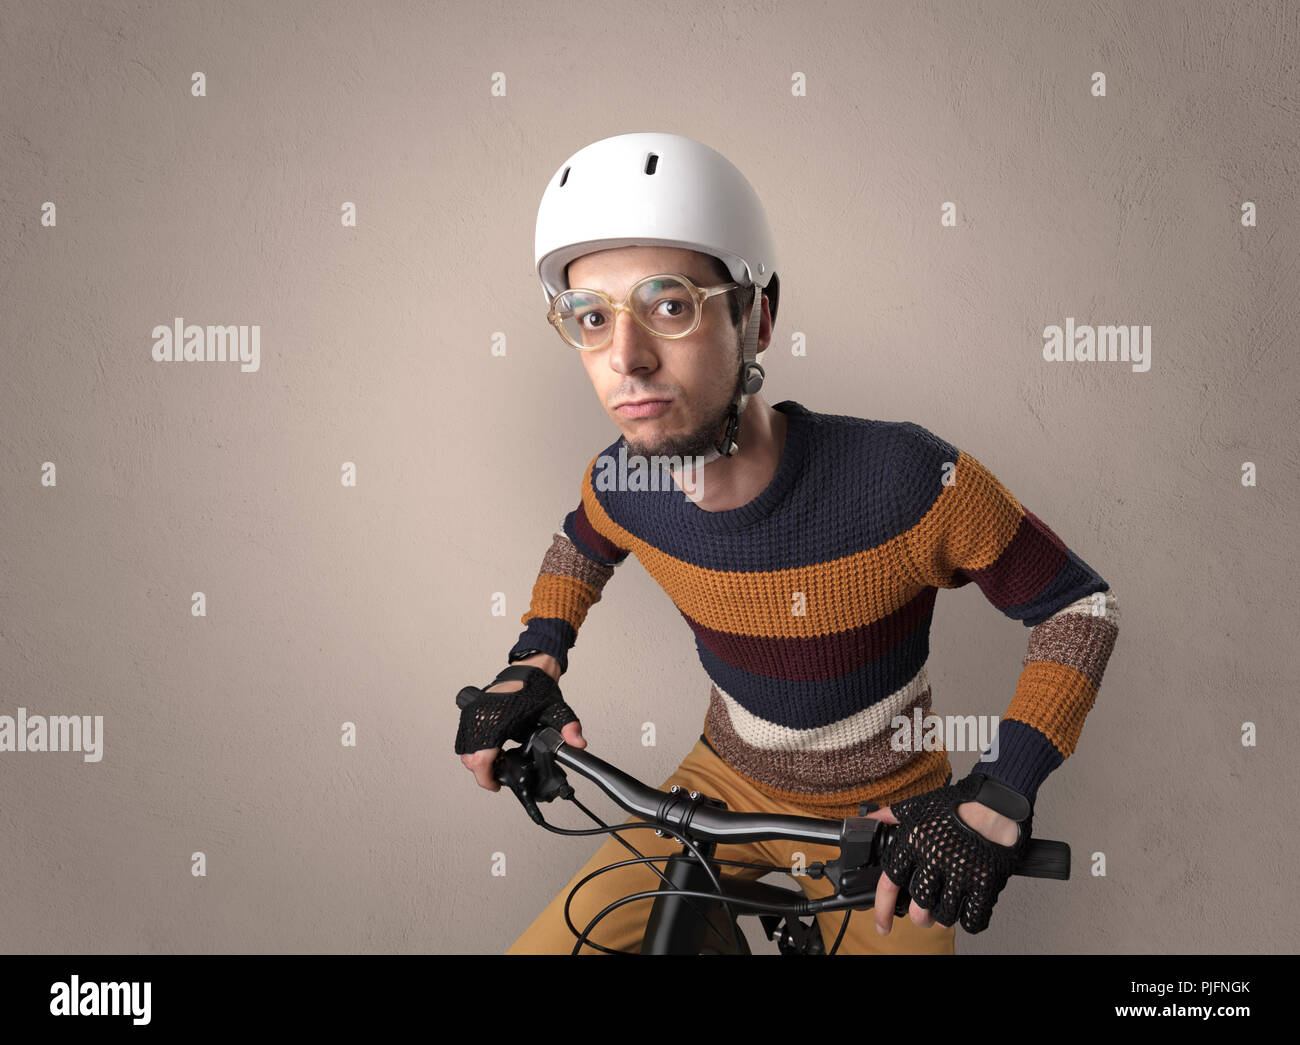 Nerd young foolish biker on a bike with oldschool outfit Stock Photo - Alamy